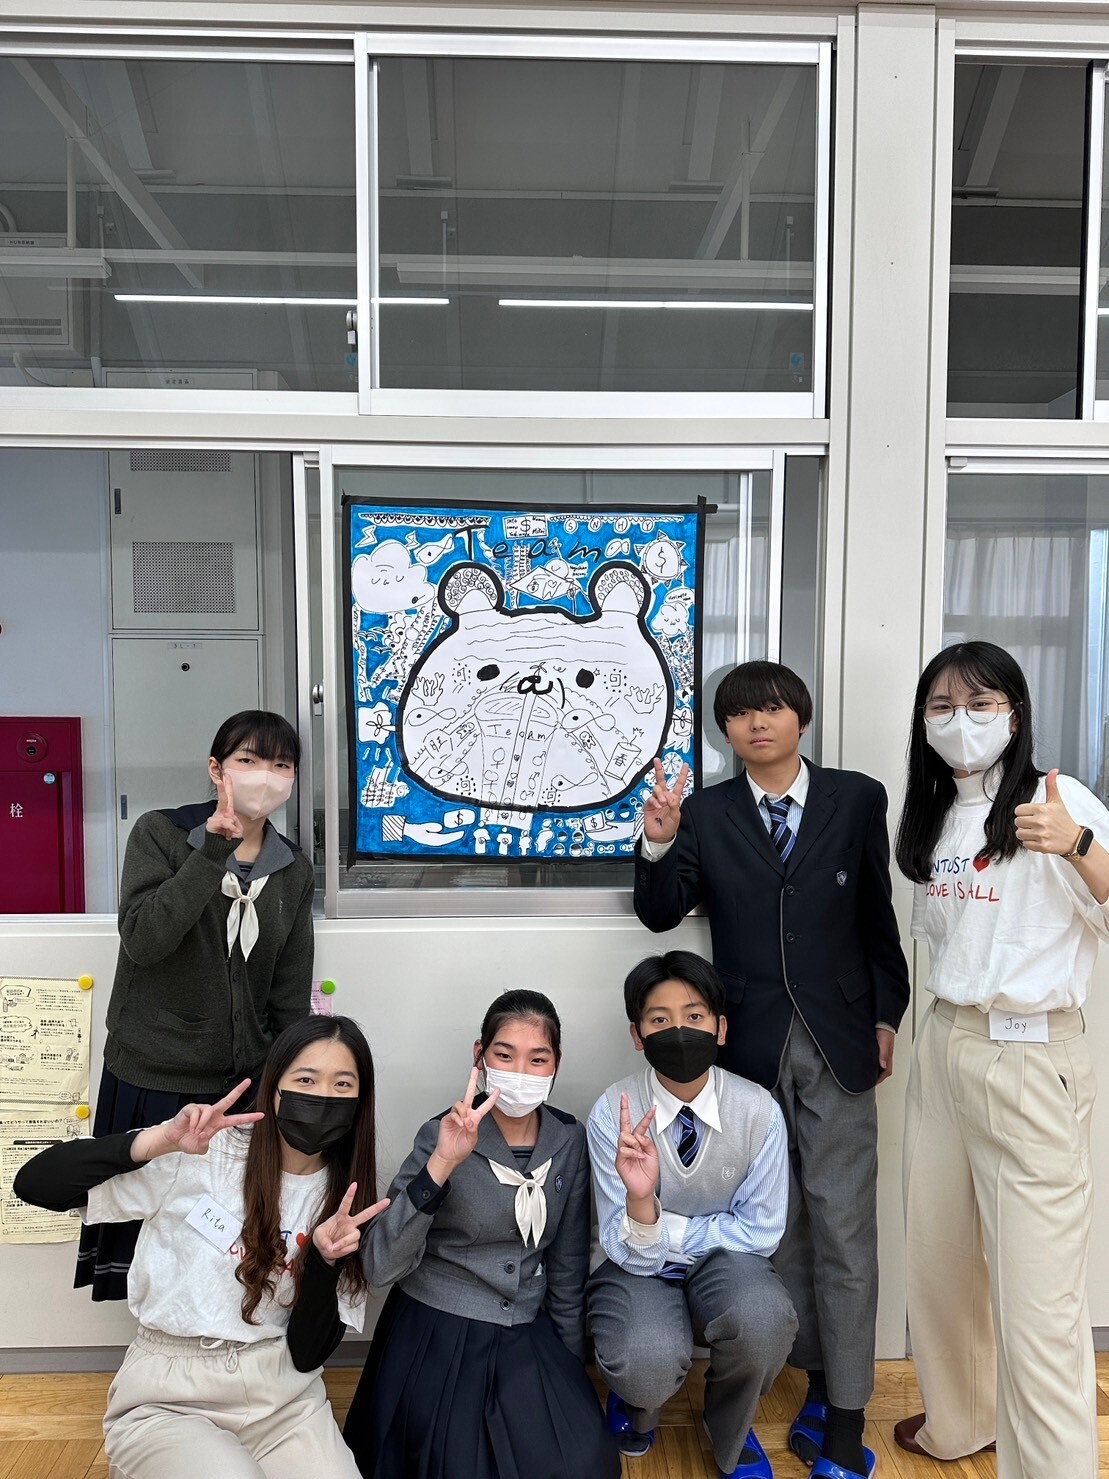 Taking a group photo with Tsuda Academy students and the SDGs collaborative artwork.